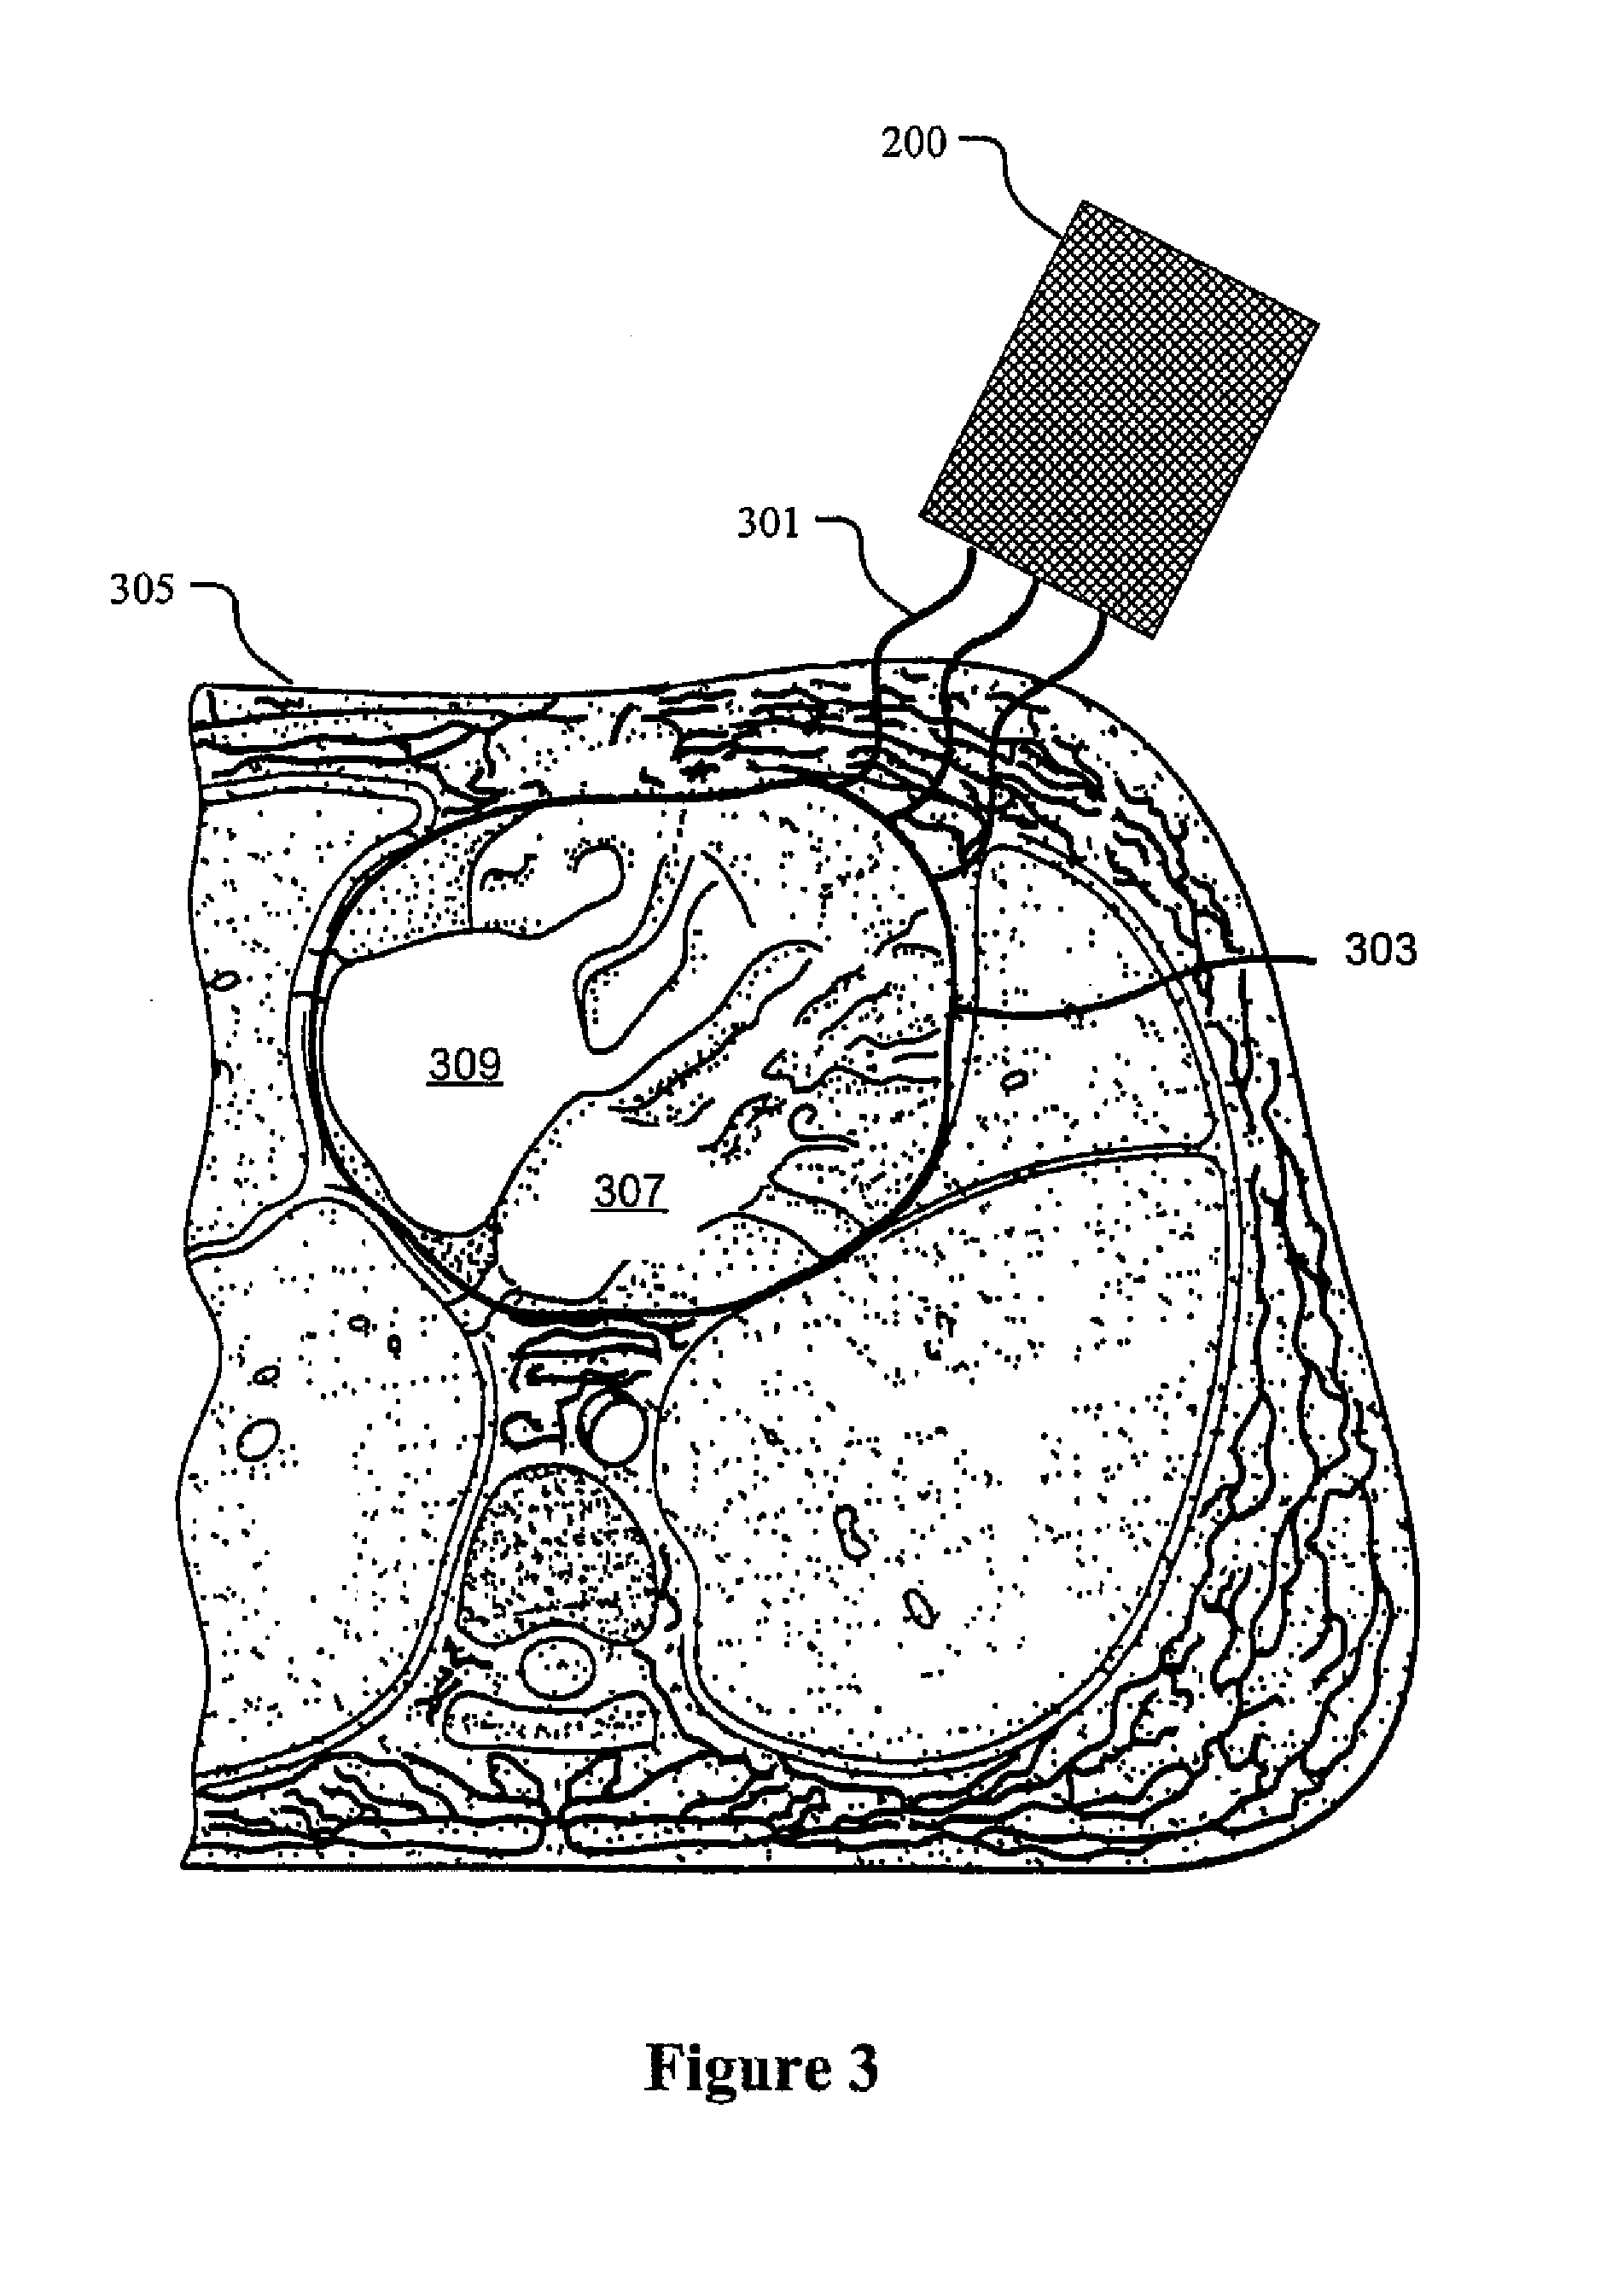 System and method for imaging myocardial infarction